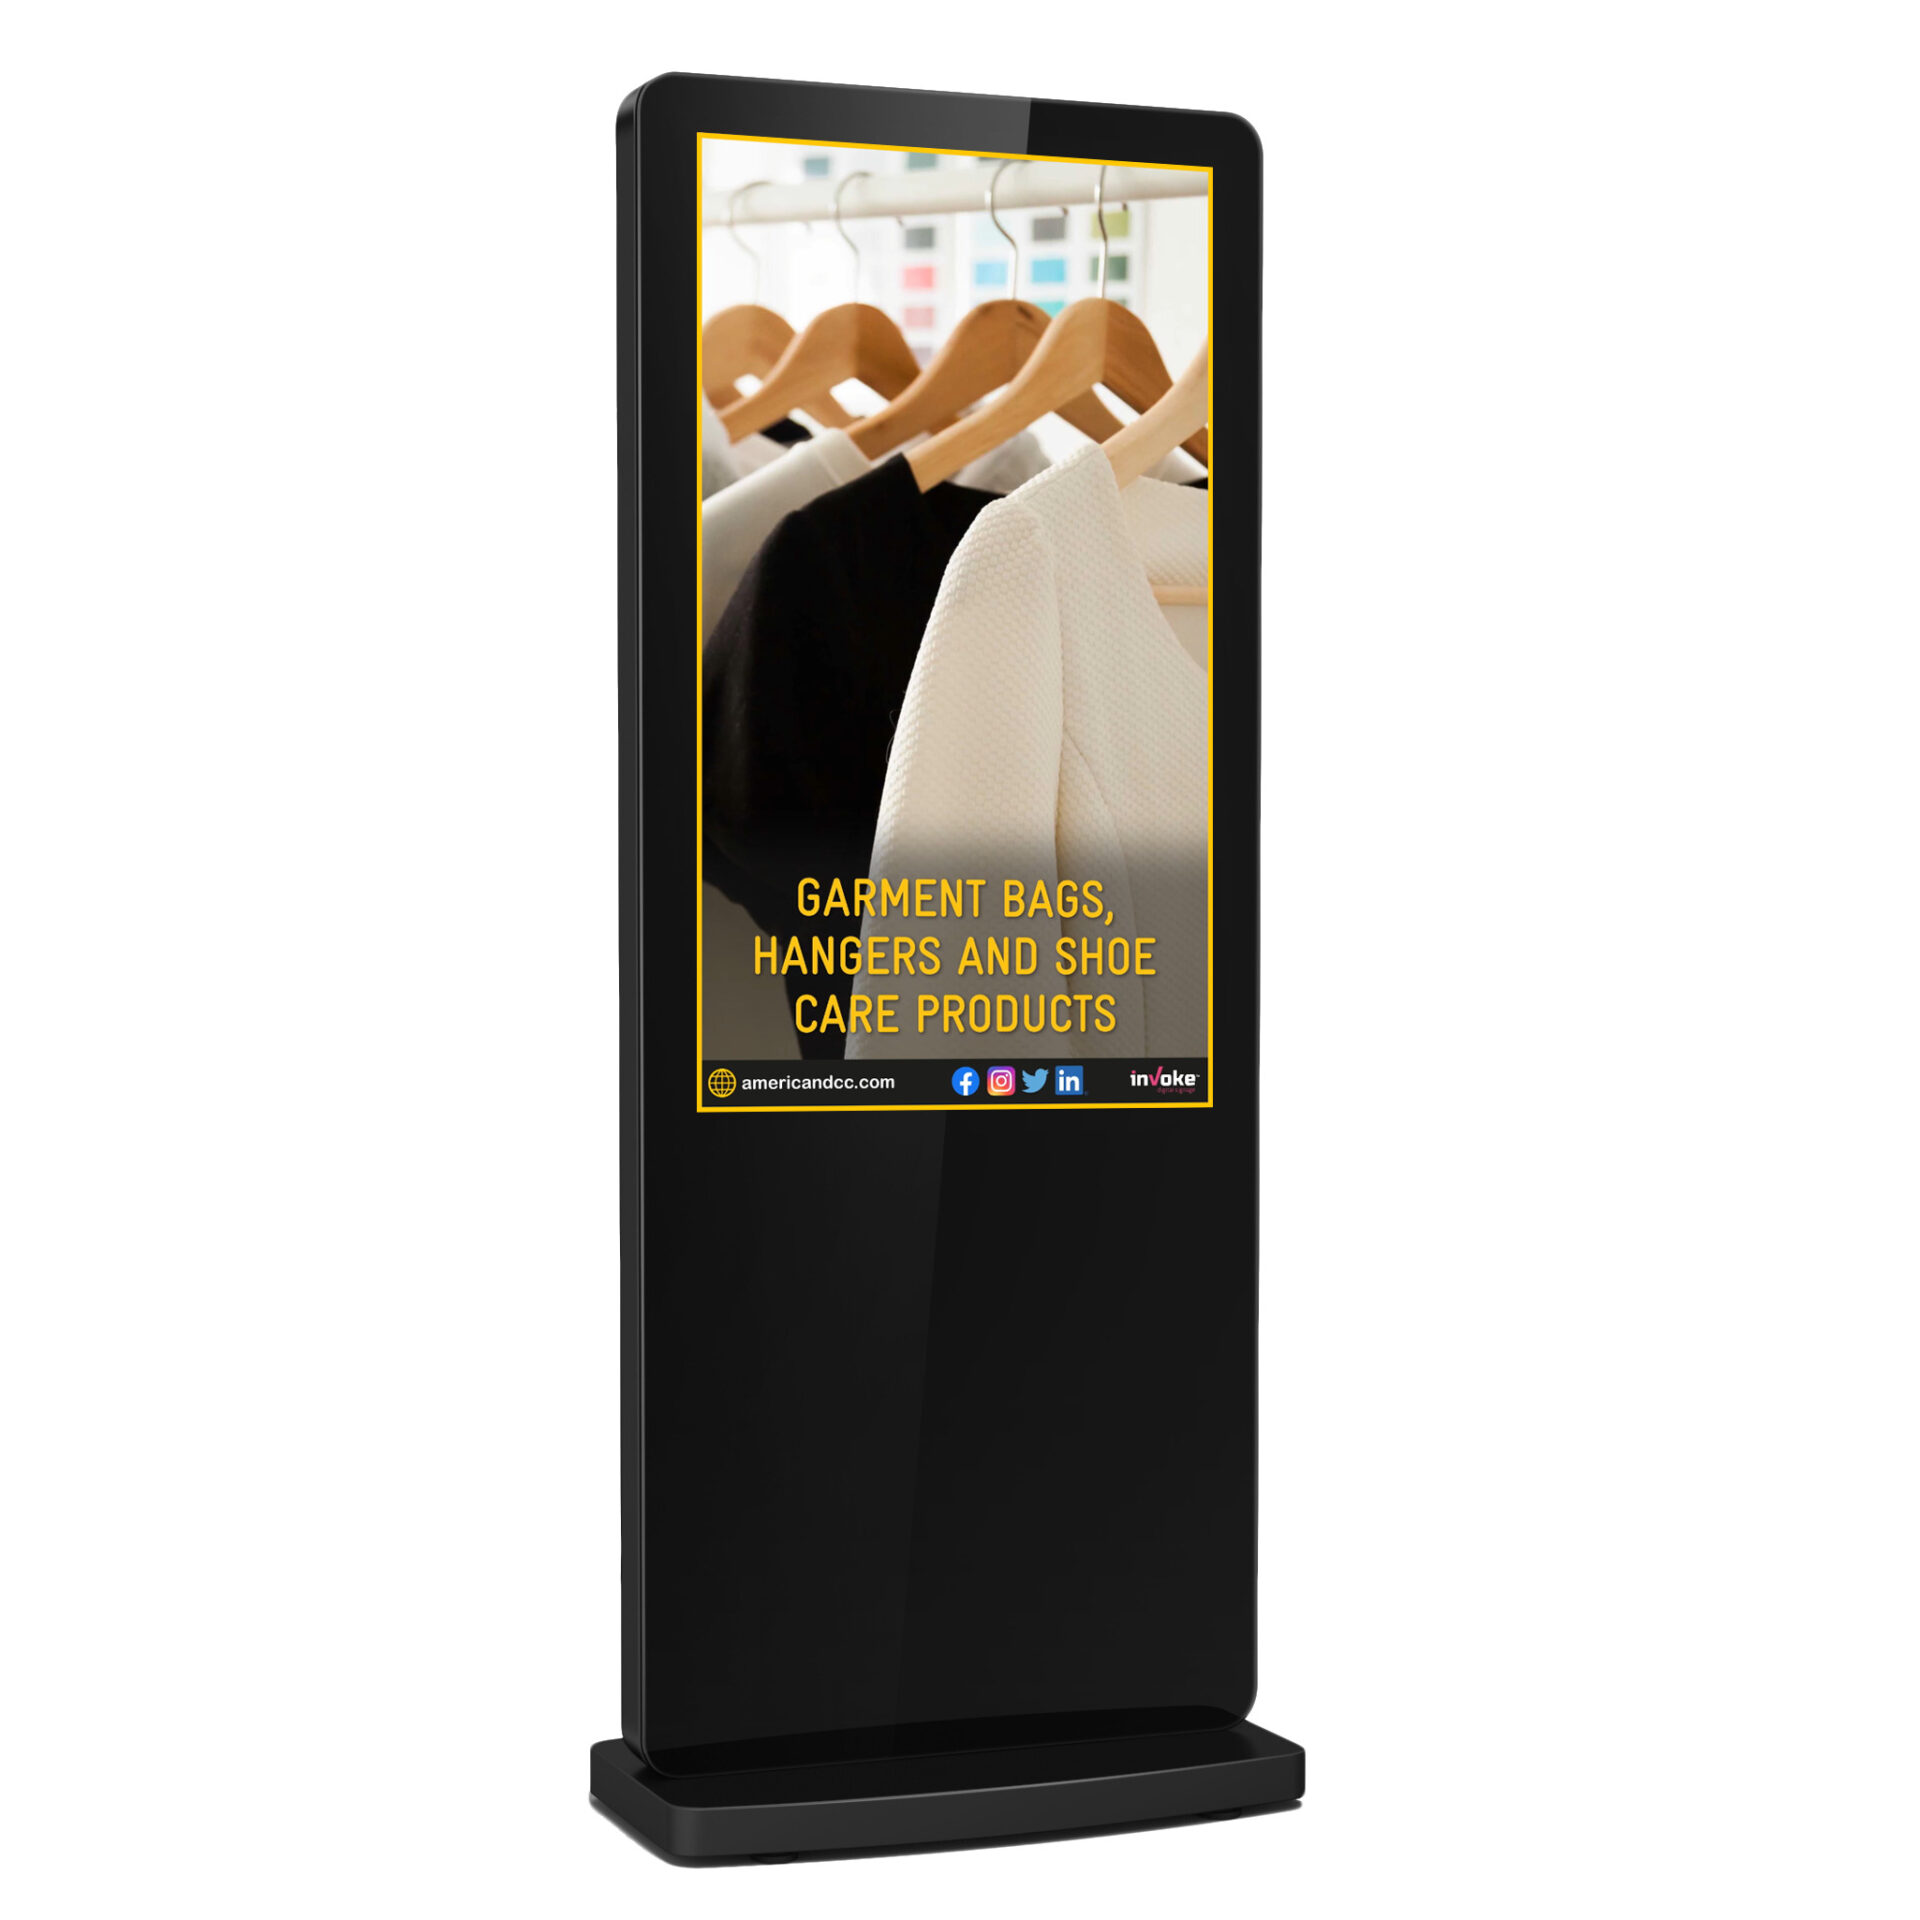 american dry cleaners free standing screen with advert about garment bags, hangers and shoe care products